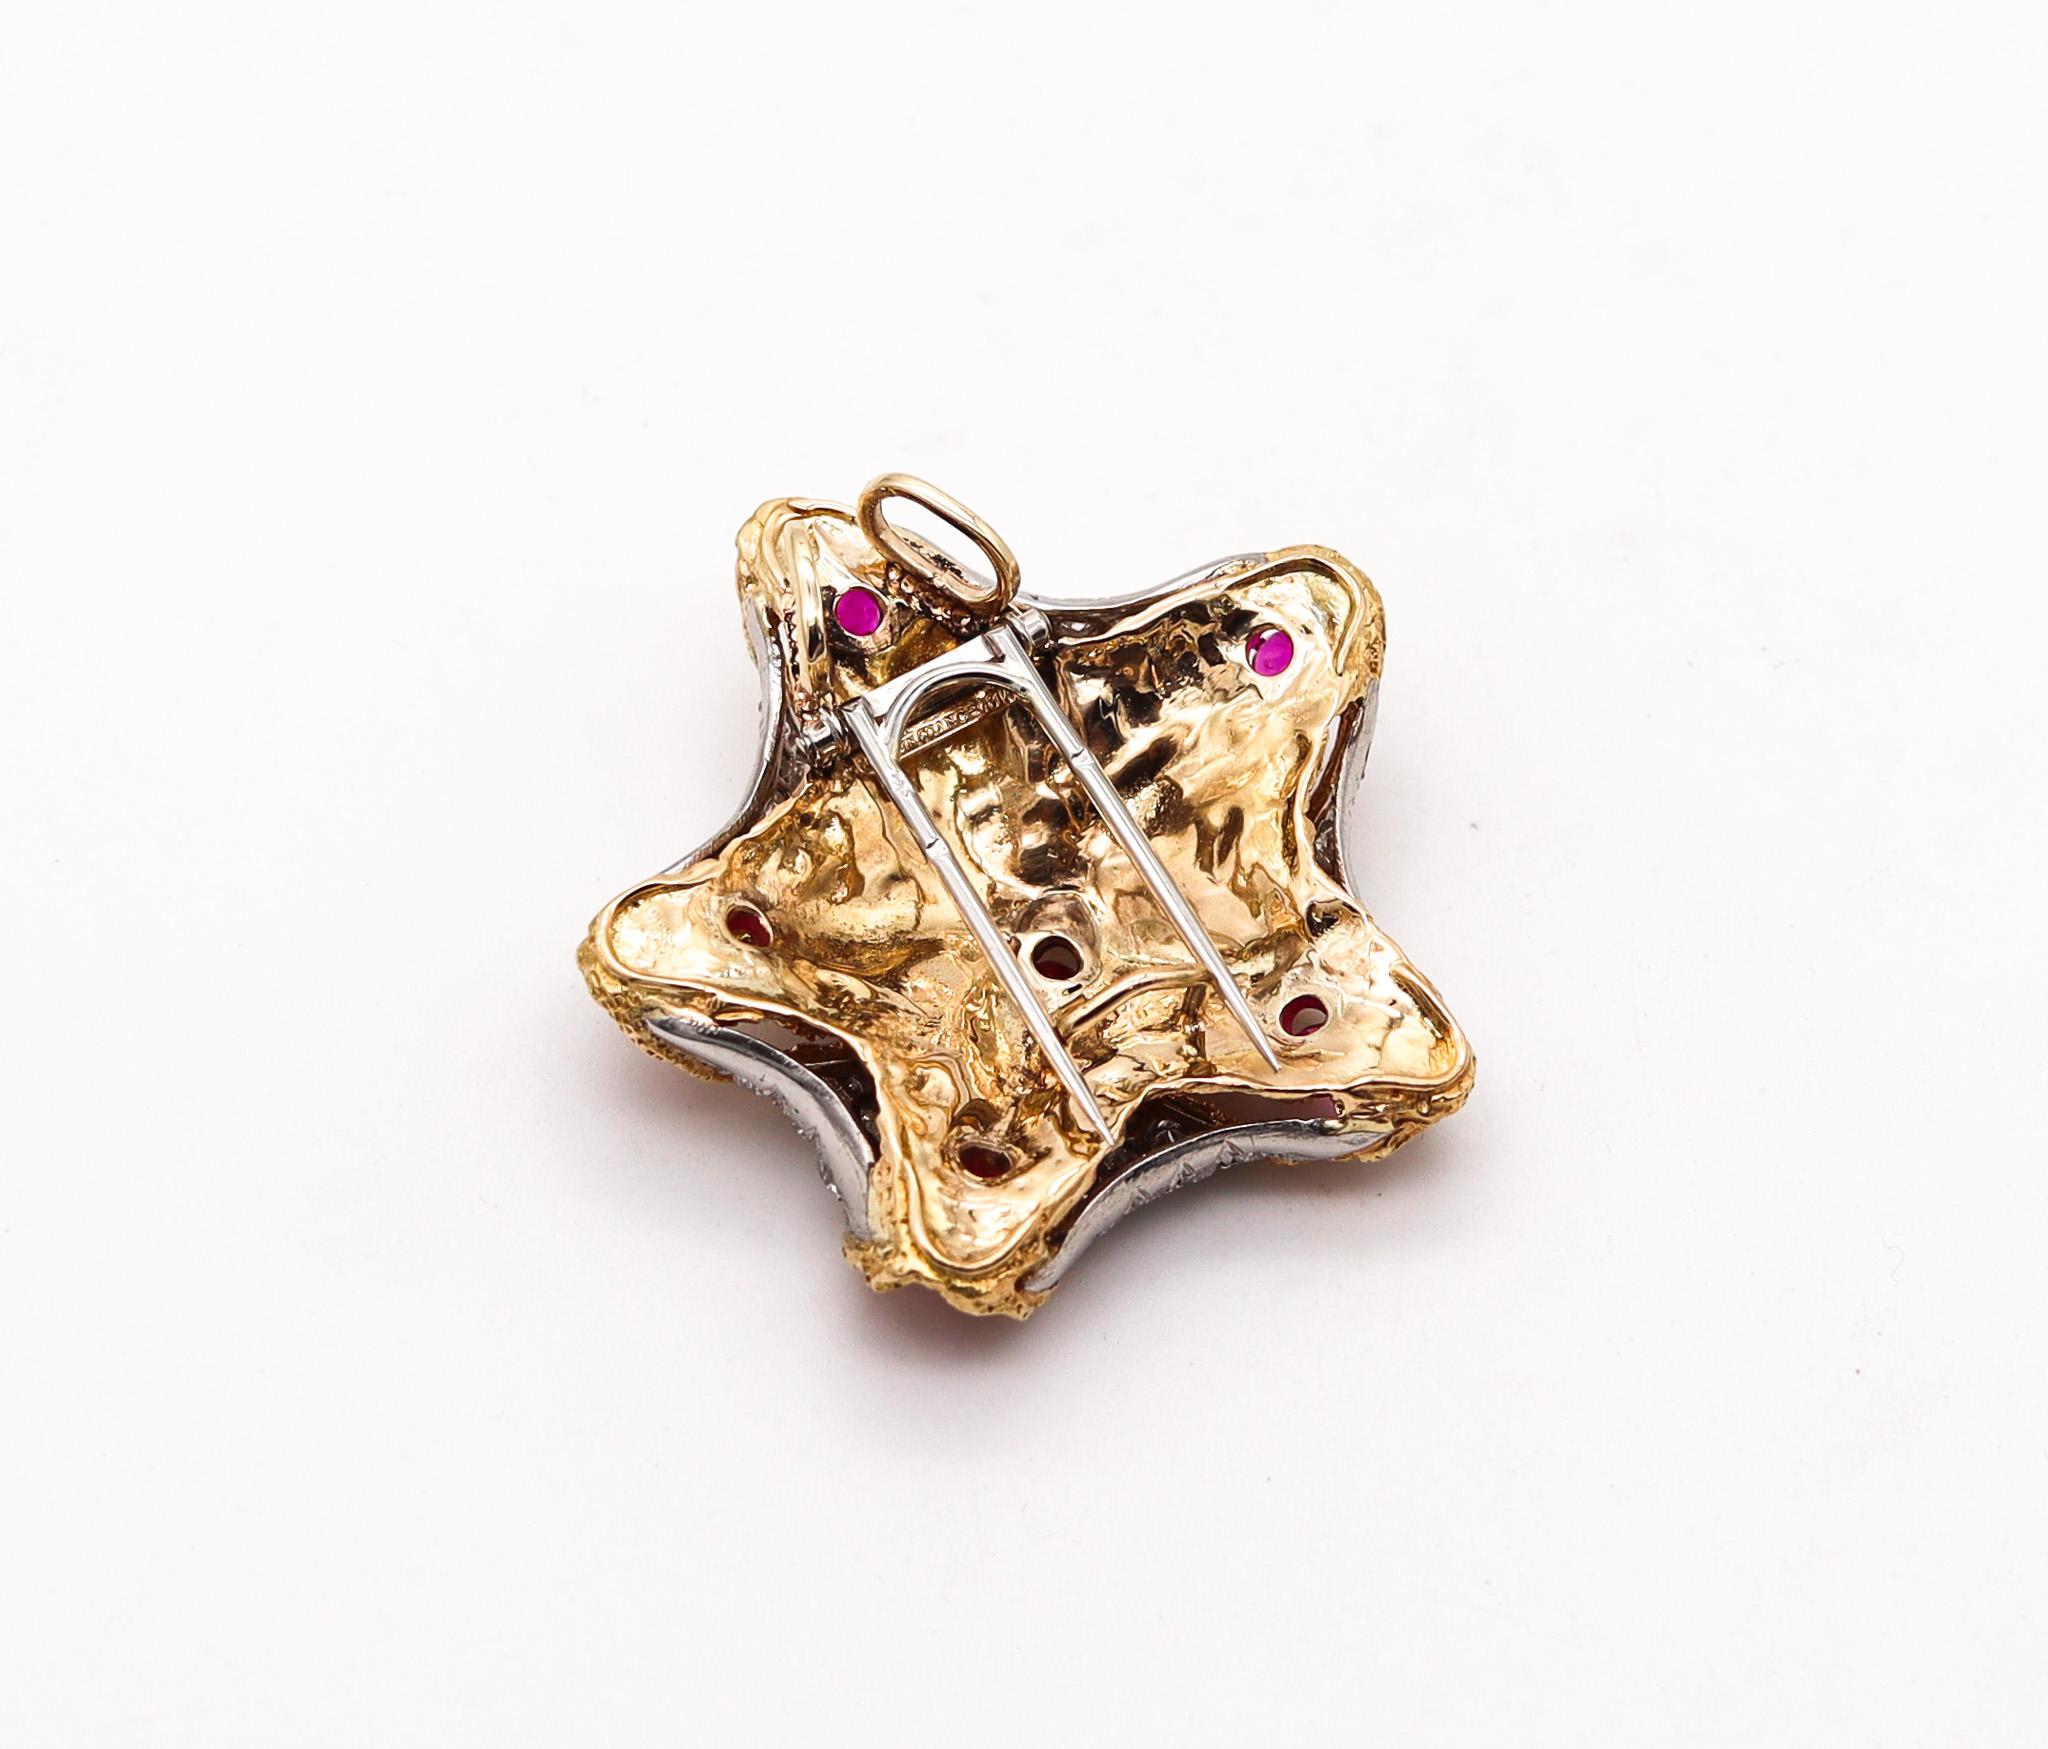 French 1960 Starfish Pendant Brooch Platinum 18Kt Gold 6.72 Ctw Diamond & Rubies In Excellent Condition For Sale In Miami, FL